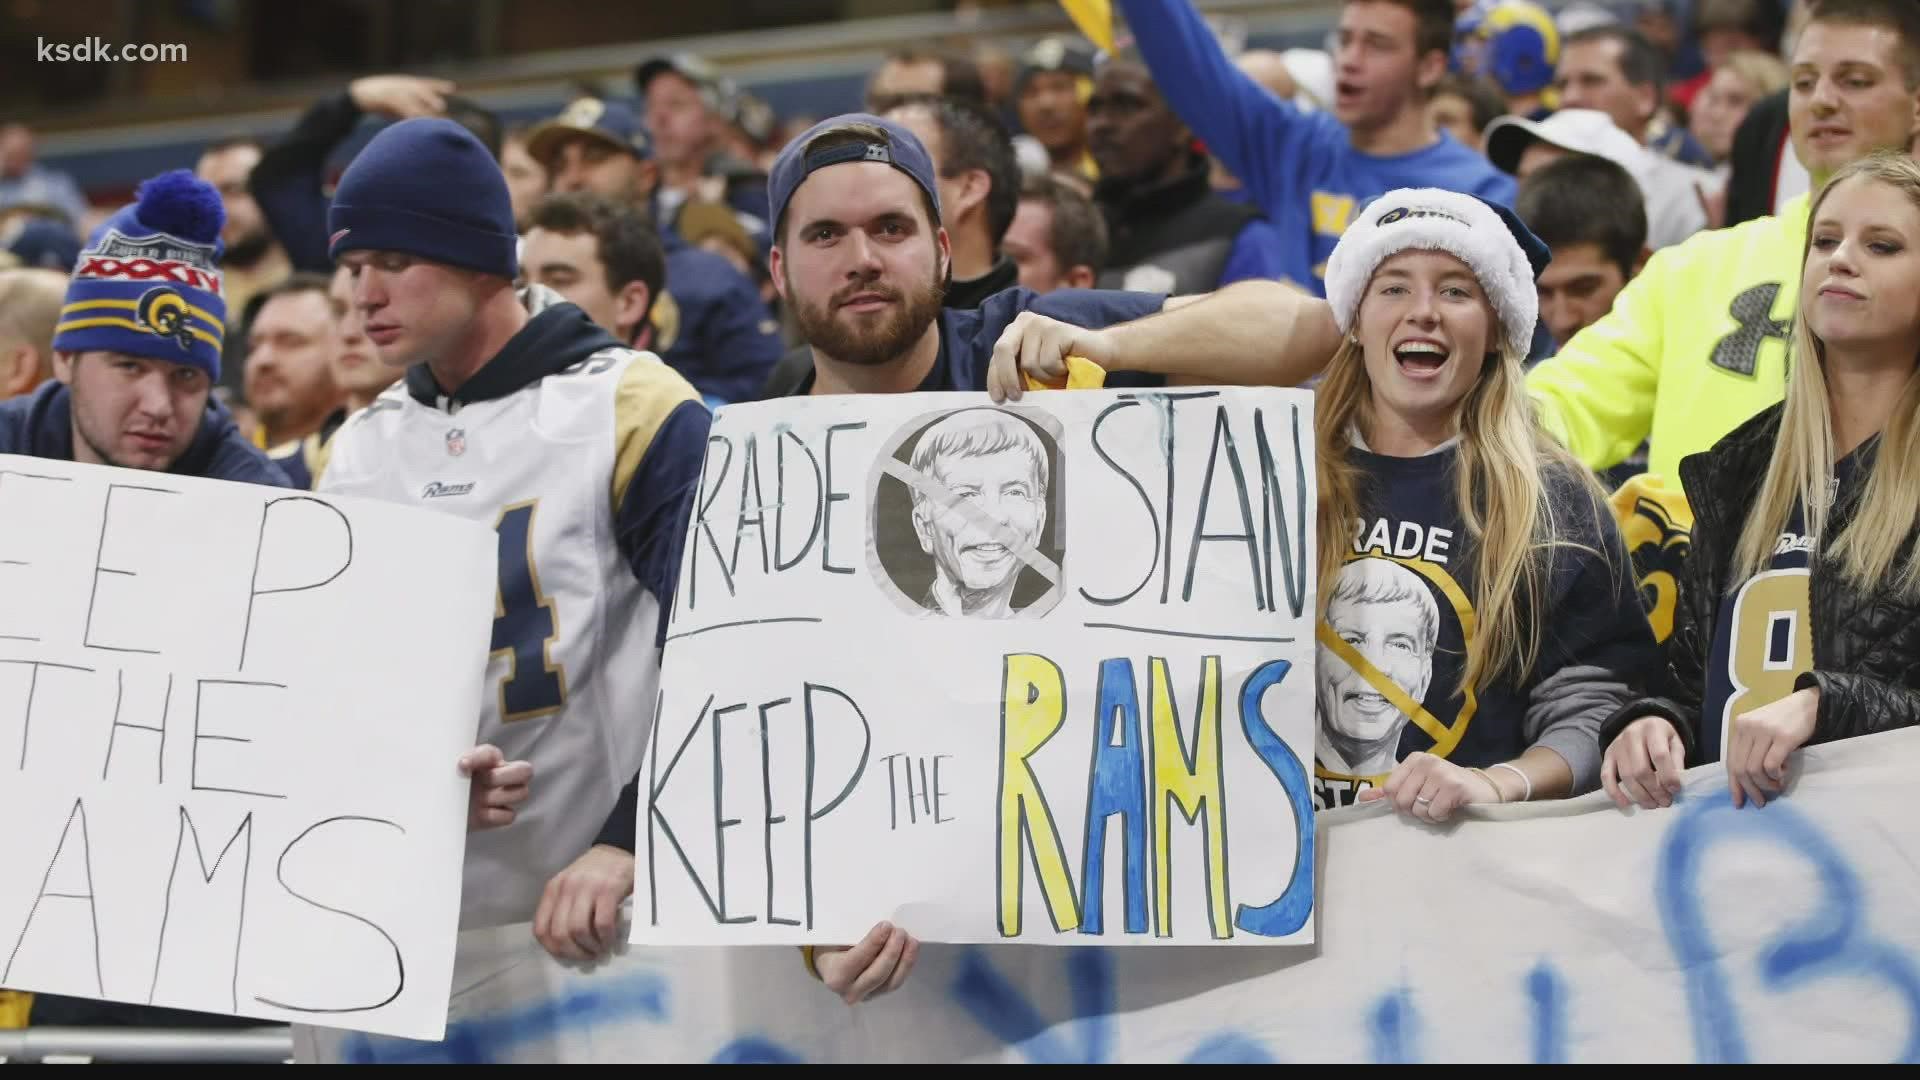 The NFL's "hail mary" to get the impending trial over the Rams' relocation moved out of St. Louis was shot down once again on Tuesday